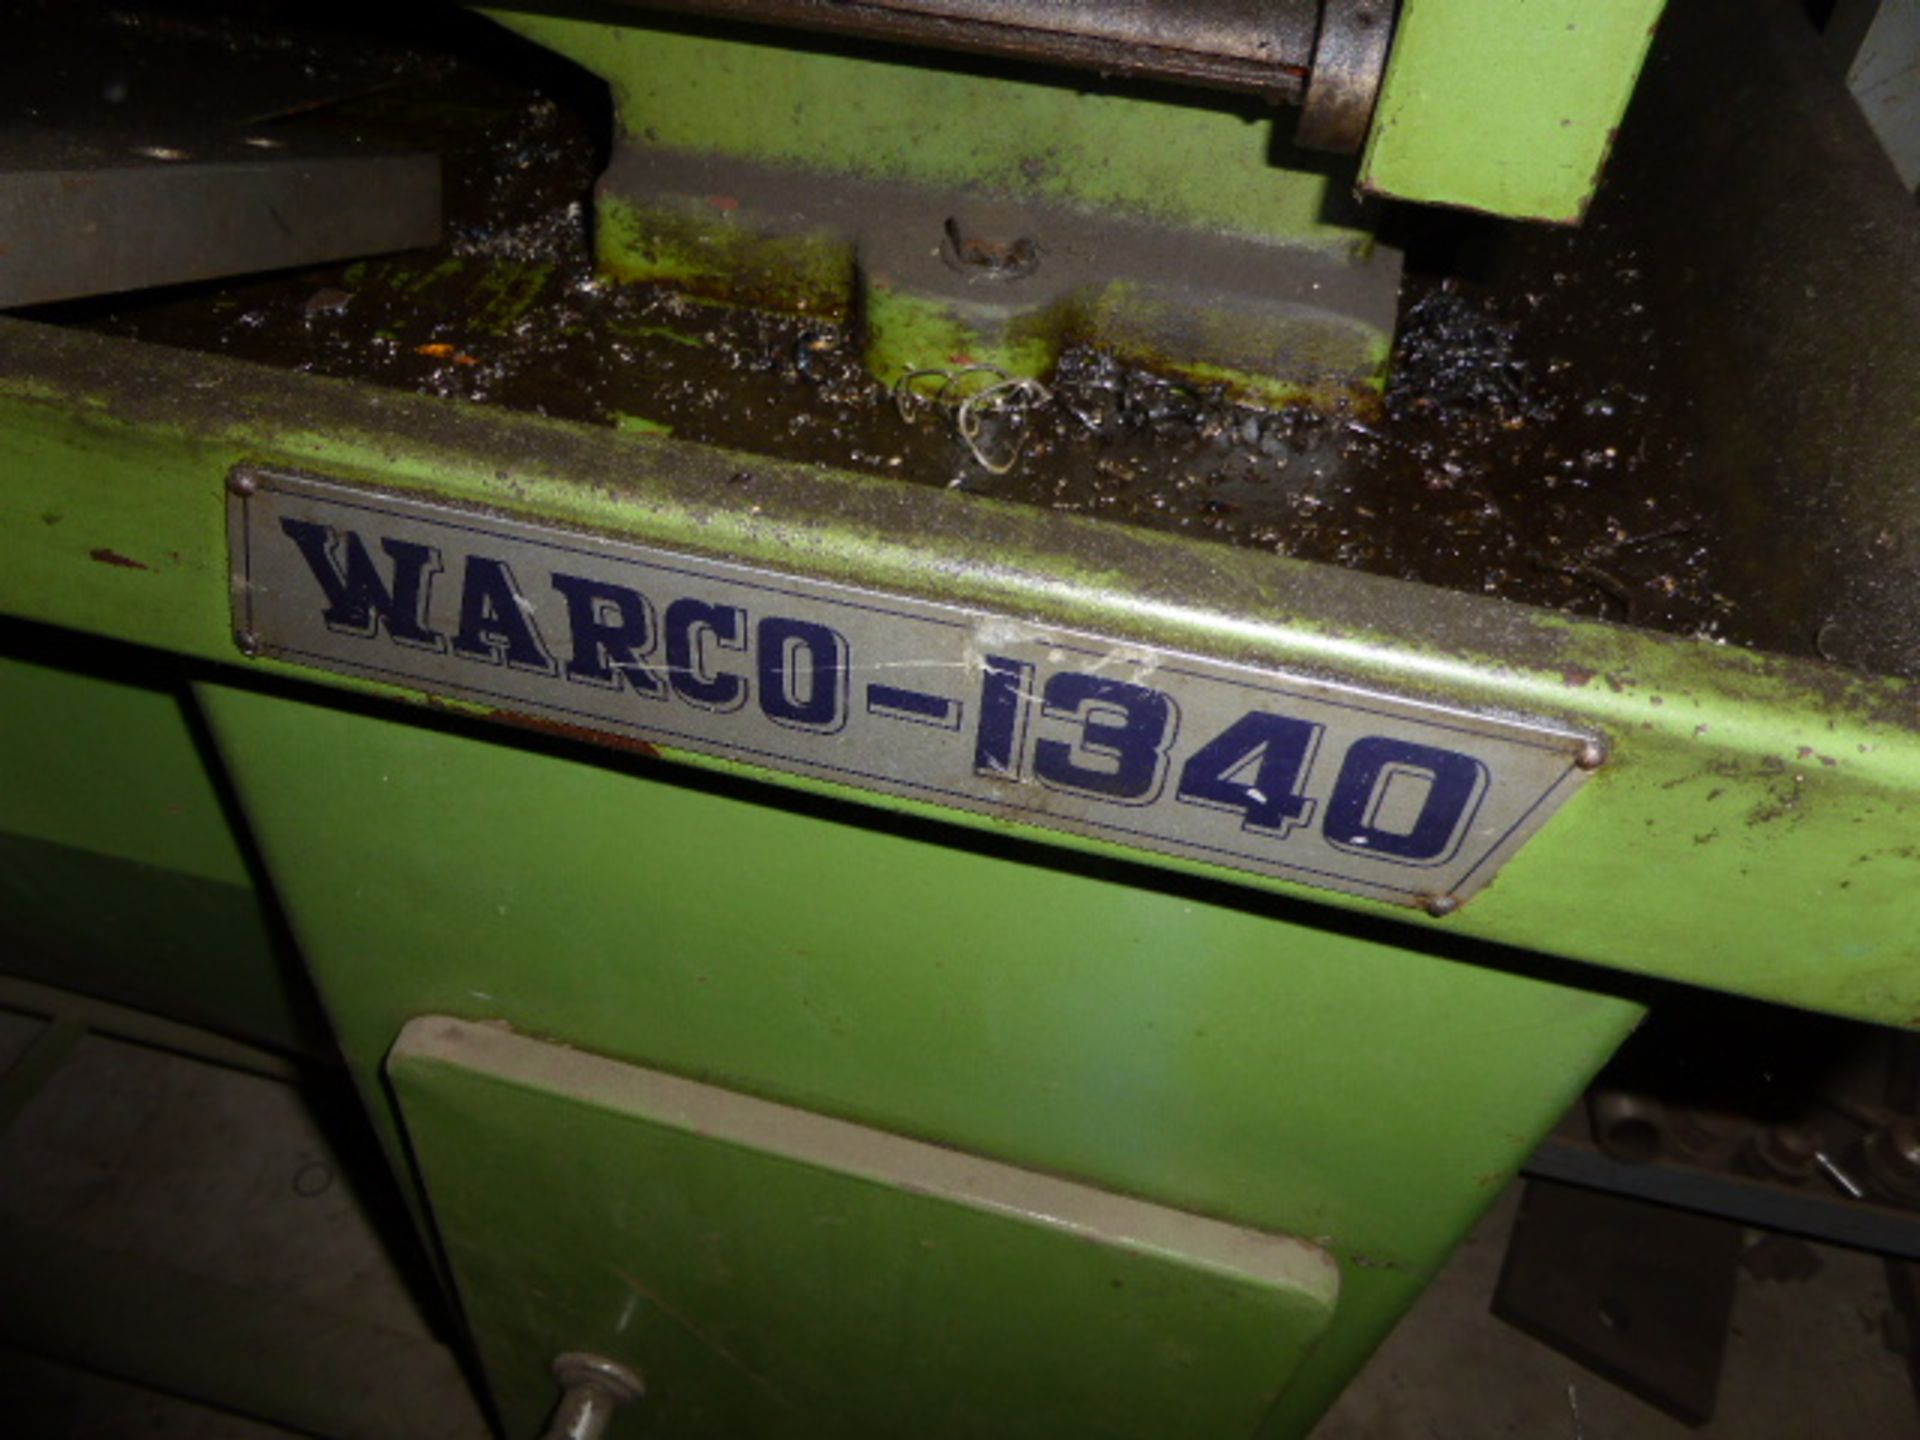 Warco model 1340 800mm x 160mm centre lathe with 3 jaw chuck and rack with miscellaneous tooling, - Image 2 of 8